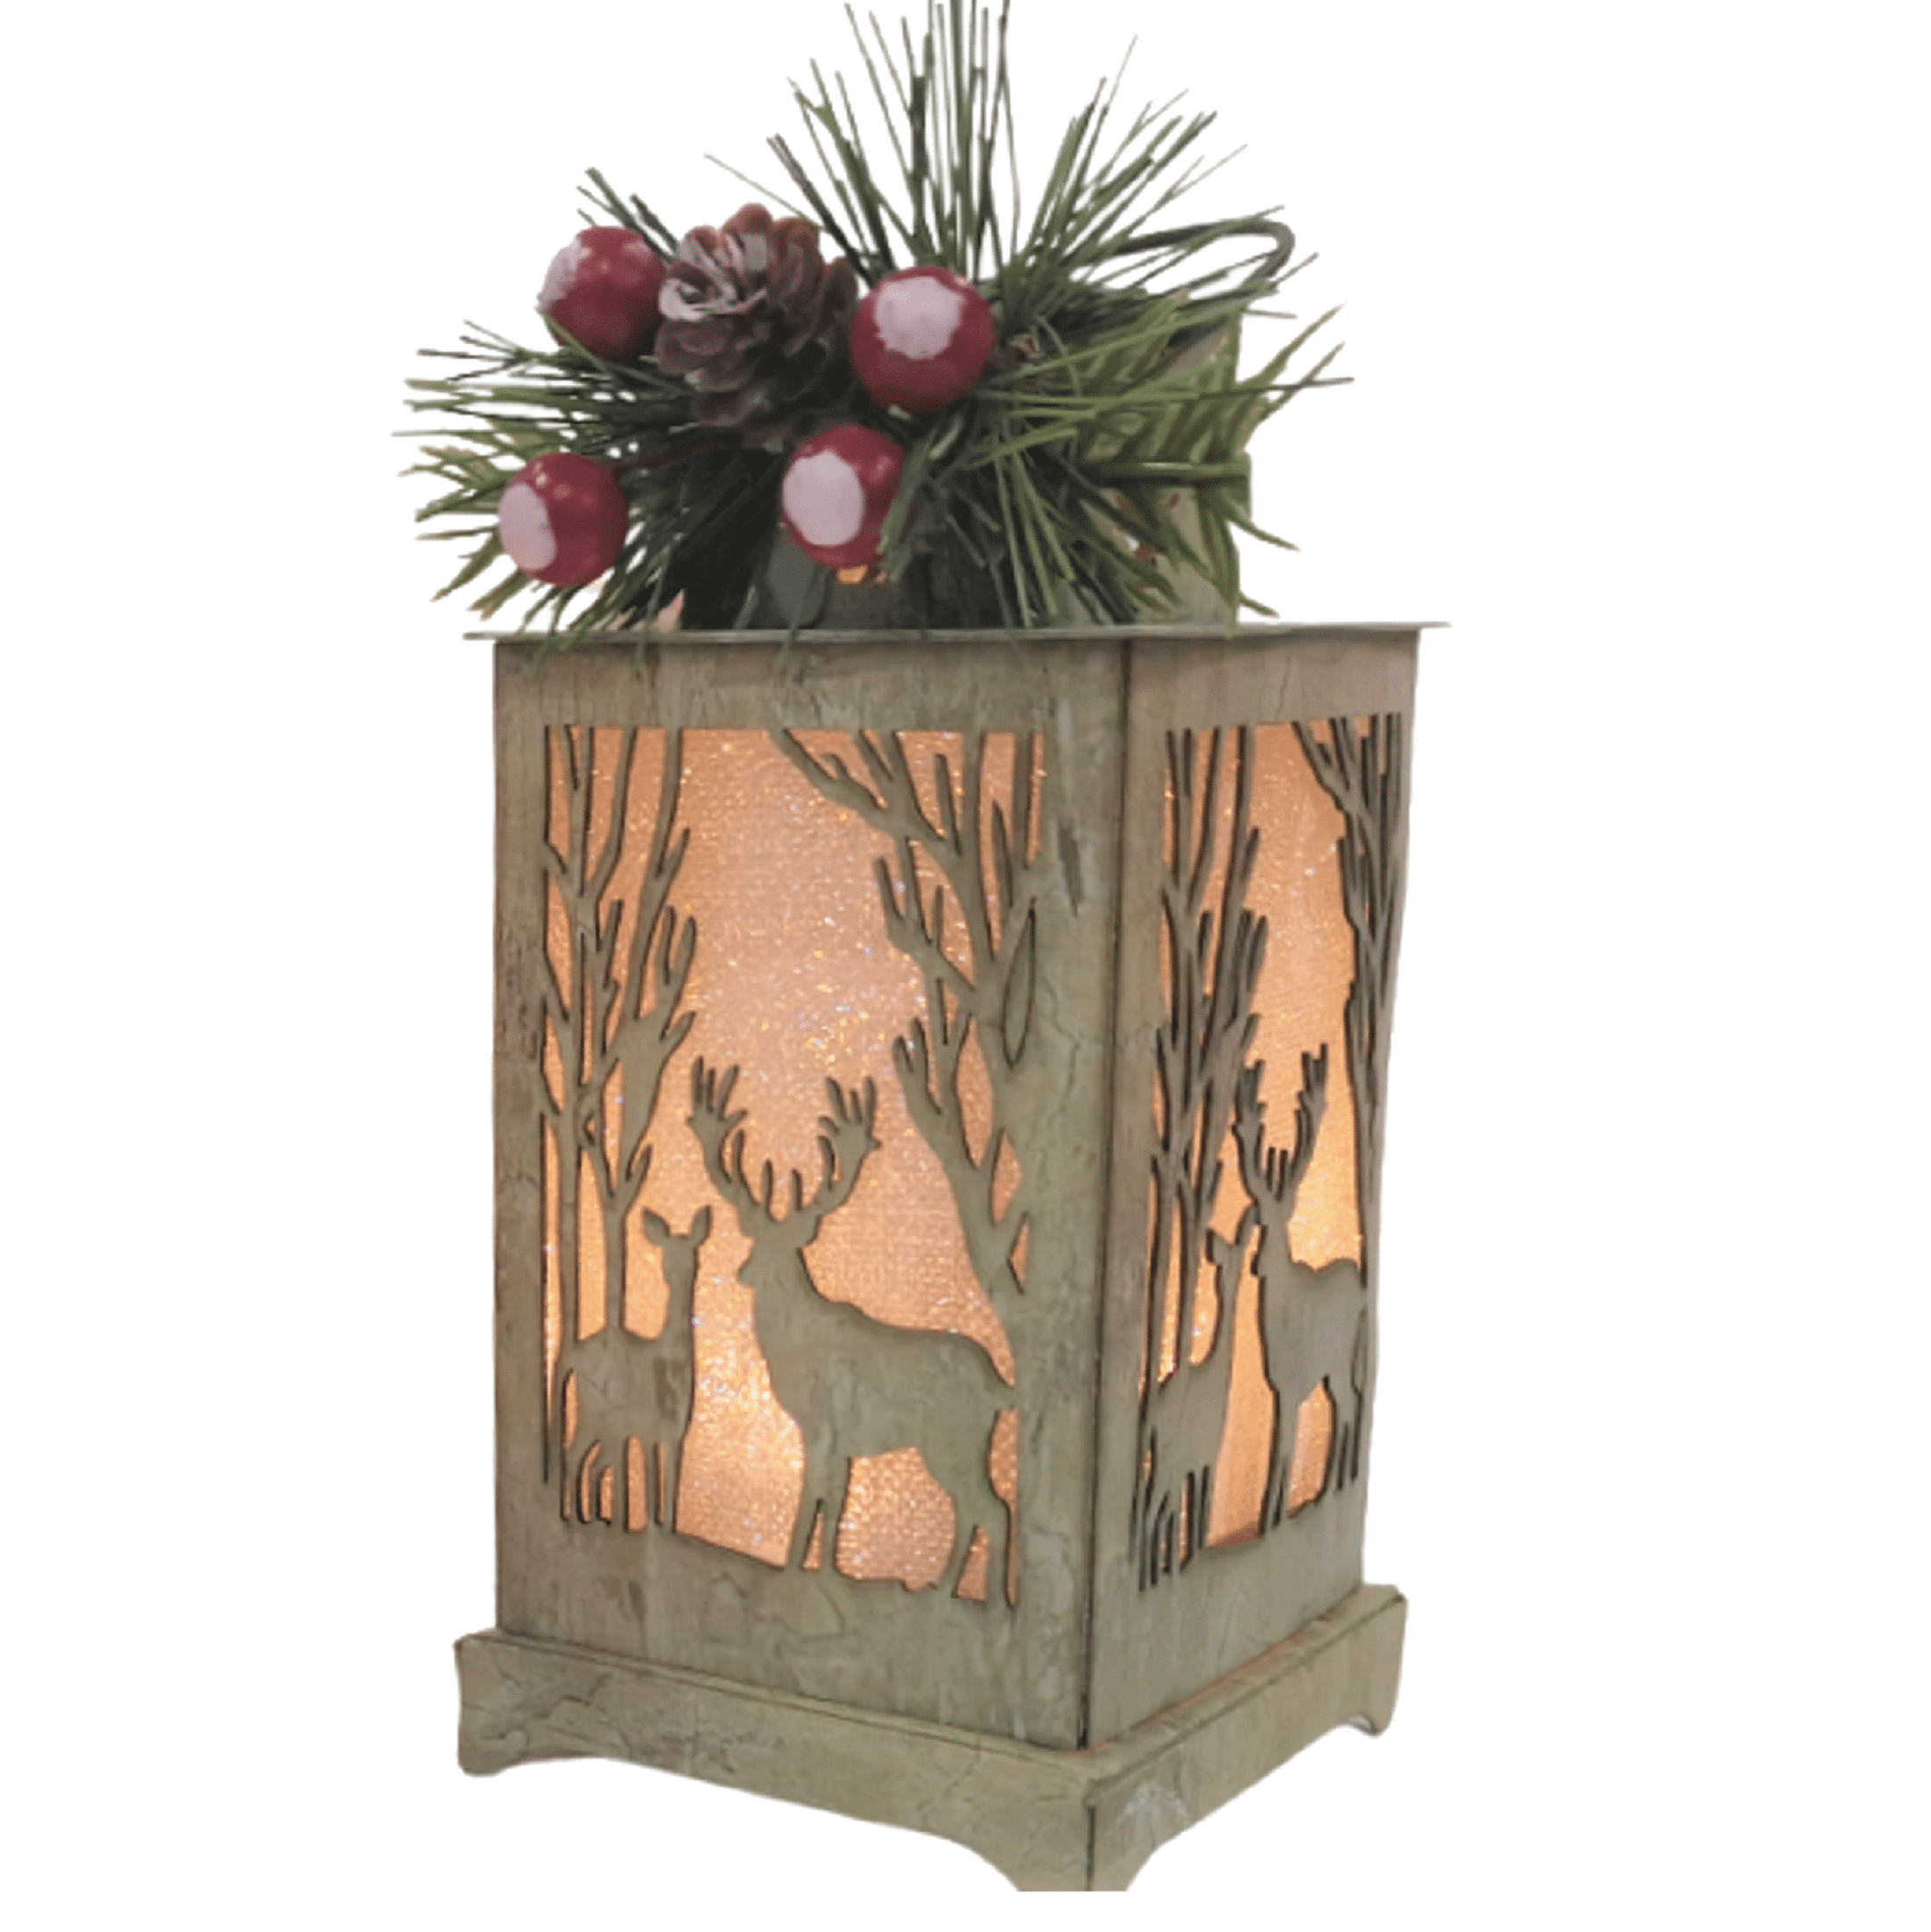 Holiday Time Light LED Deer Lantern Ornament. Deer Brown Color. Casual Traditional Theme.